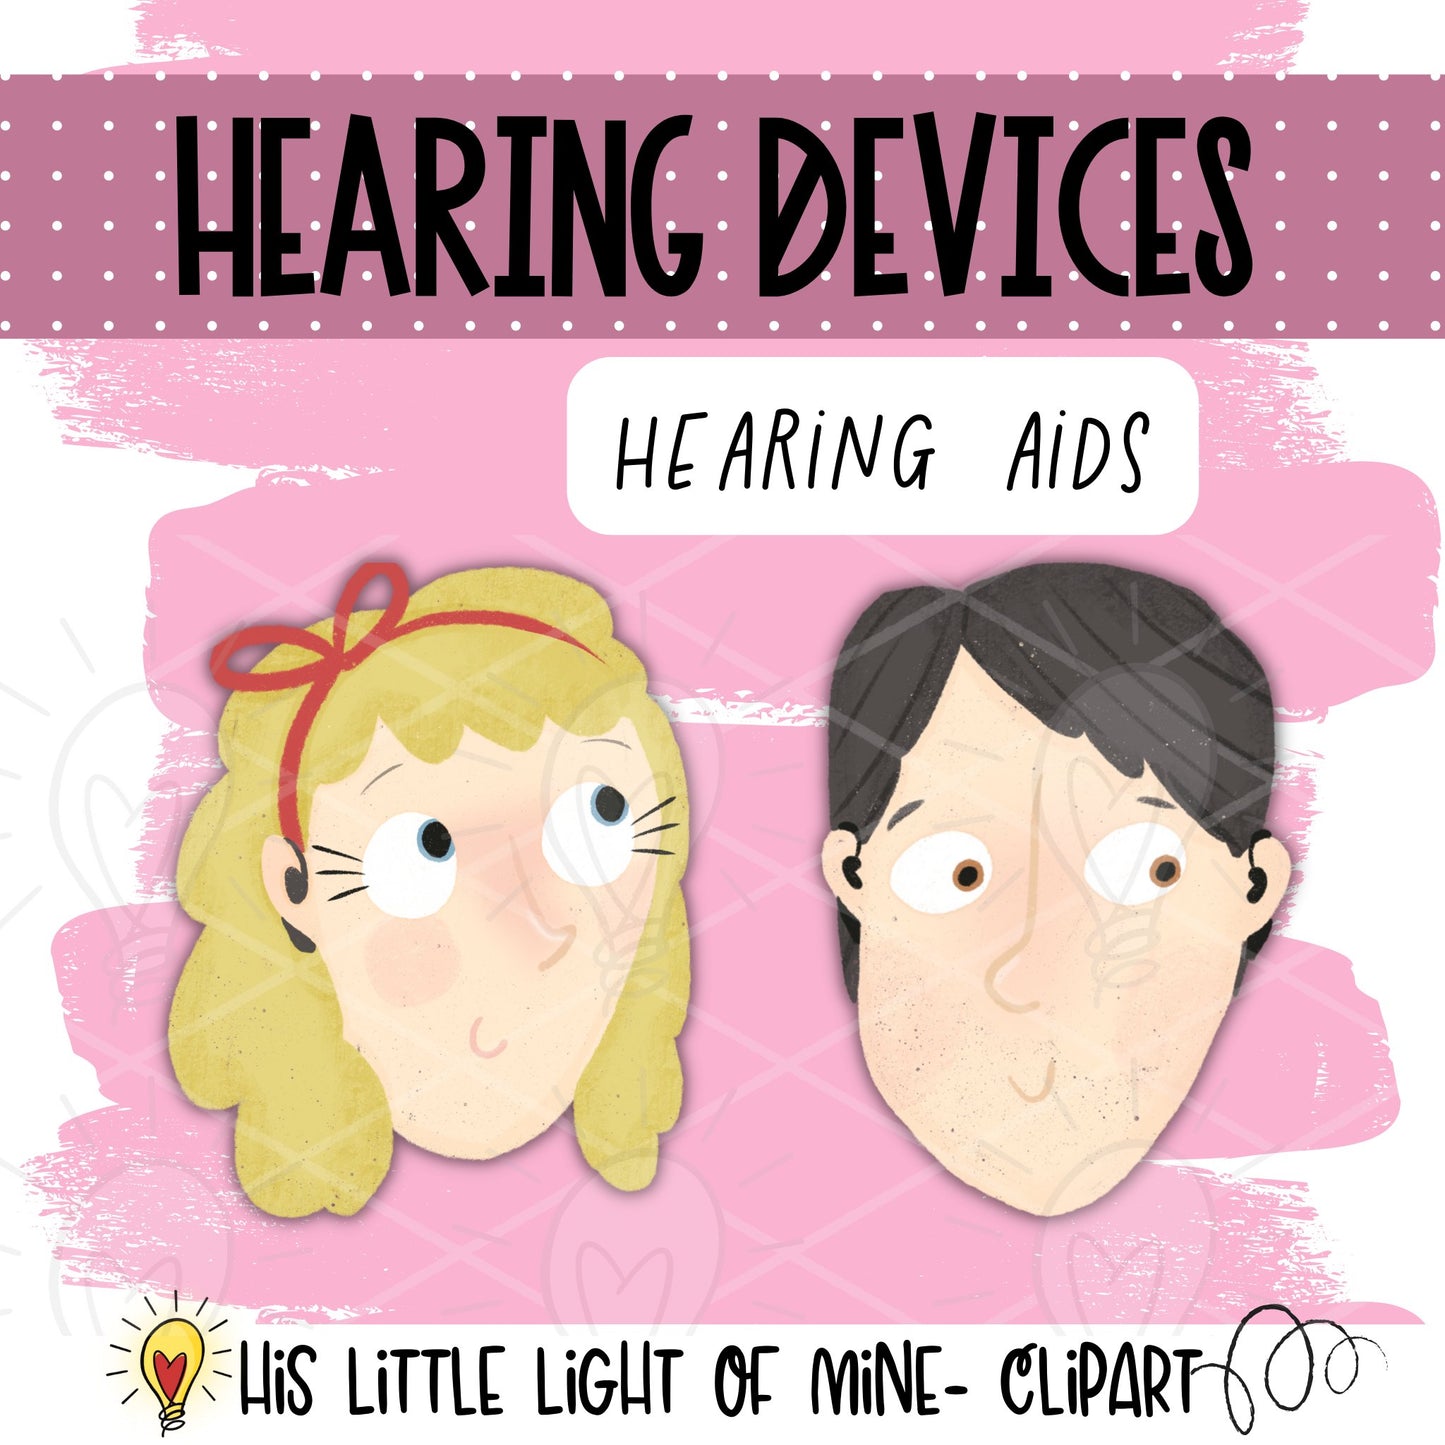 Example clip art images of children wearing hearing aids